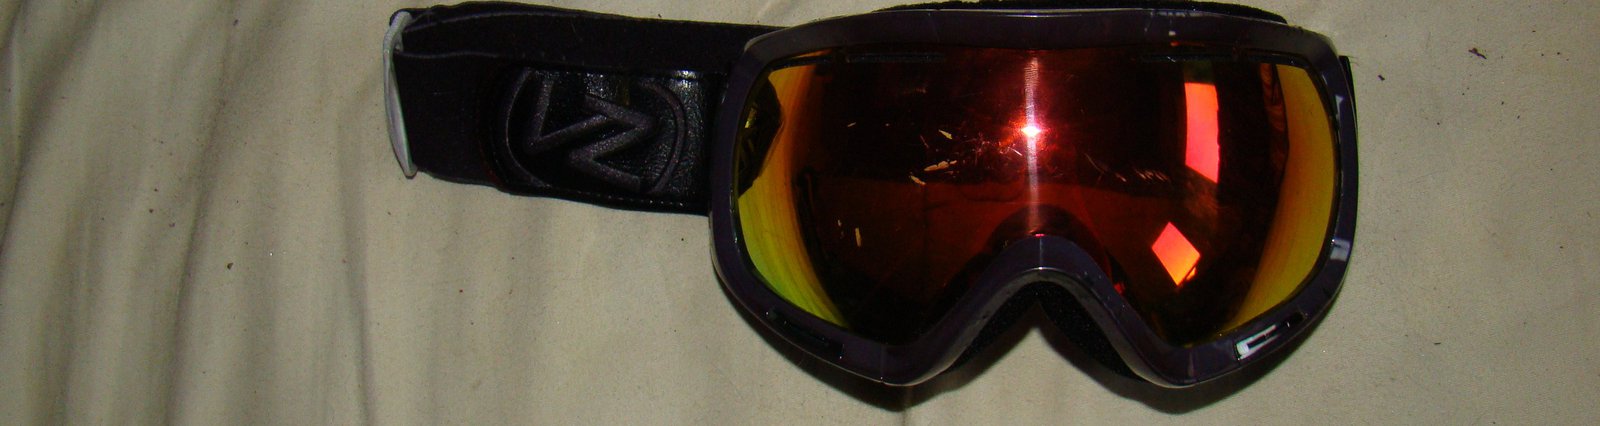 Goggles after dye